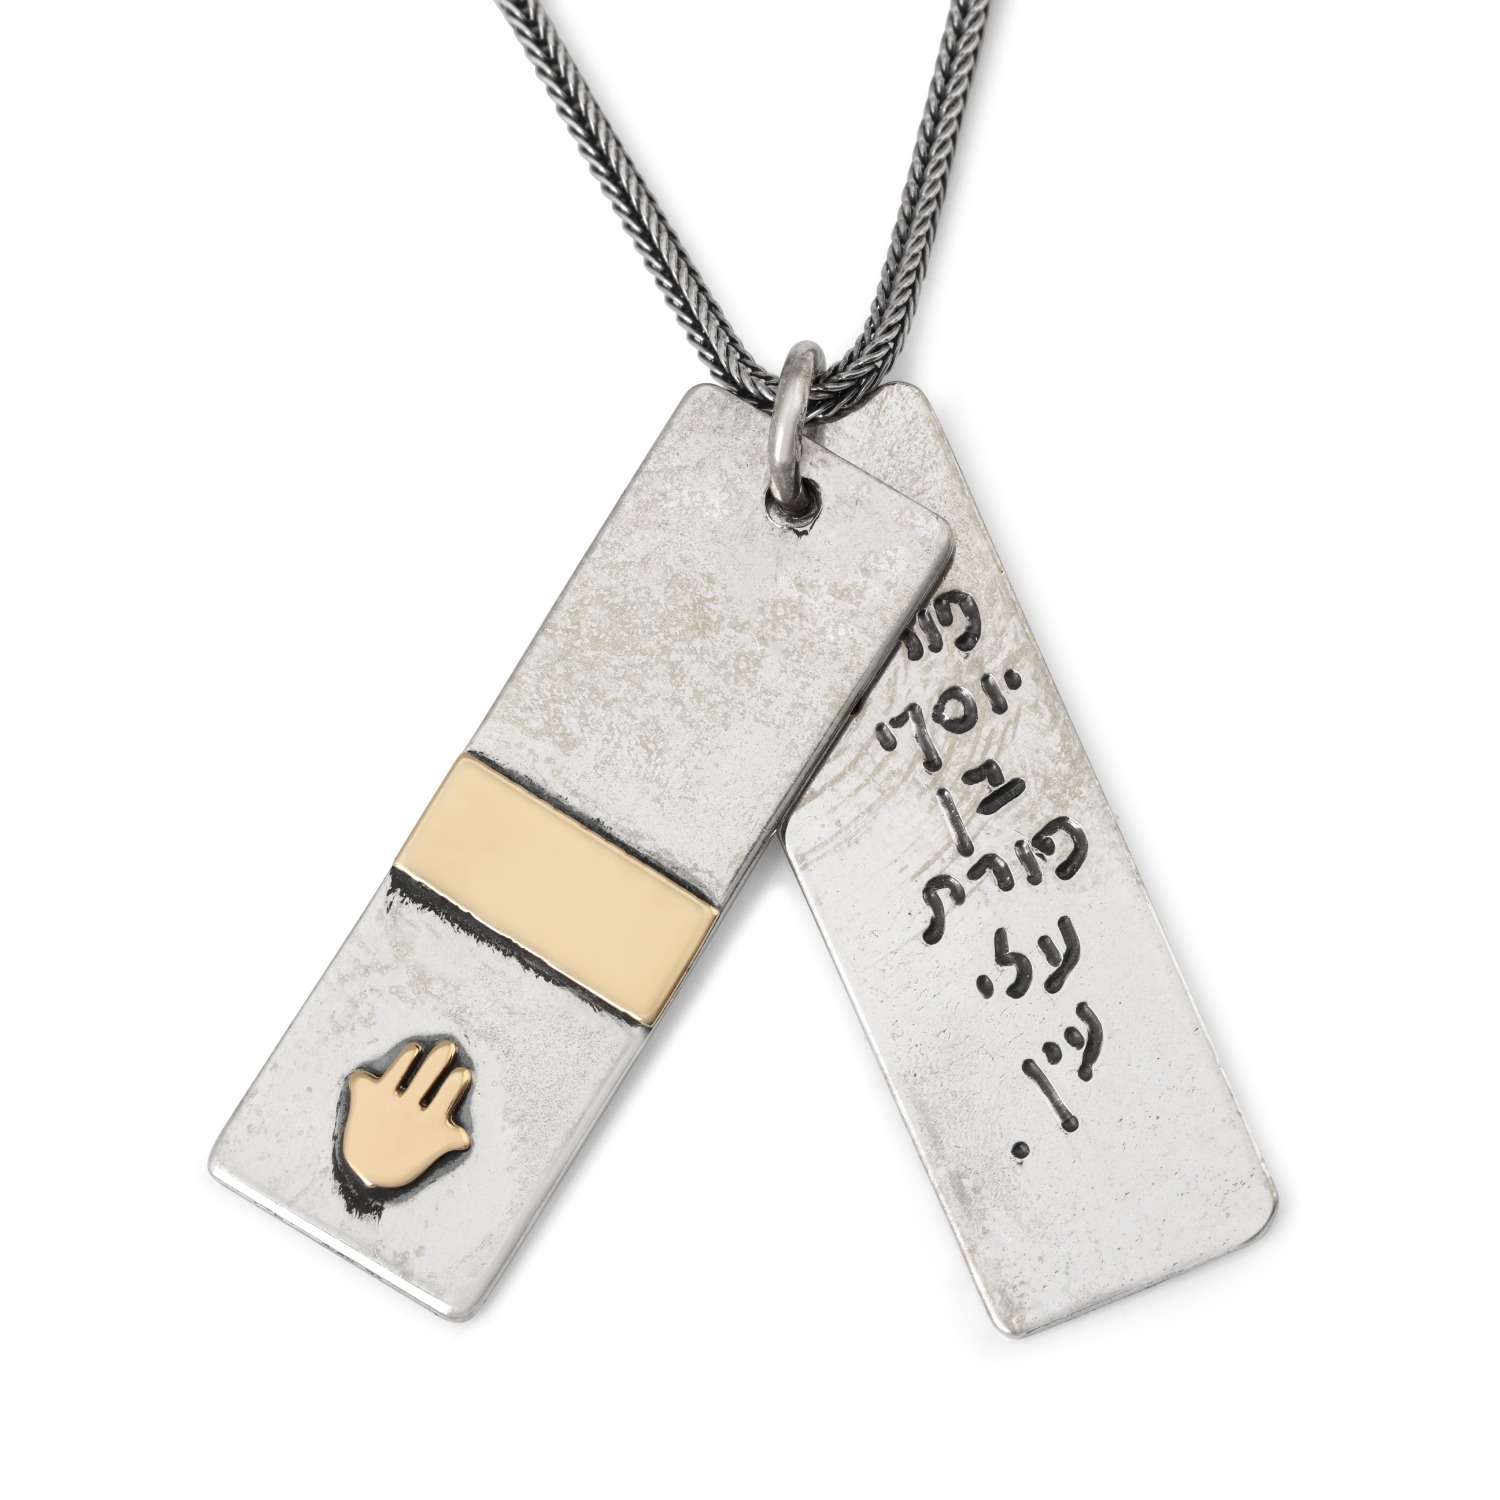 Porat Yosef: Silver and Gold "Dog Tags" Necklace - 1